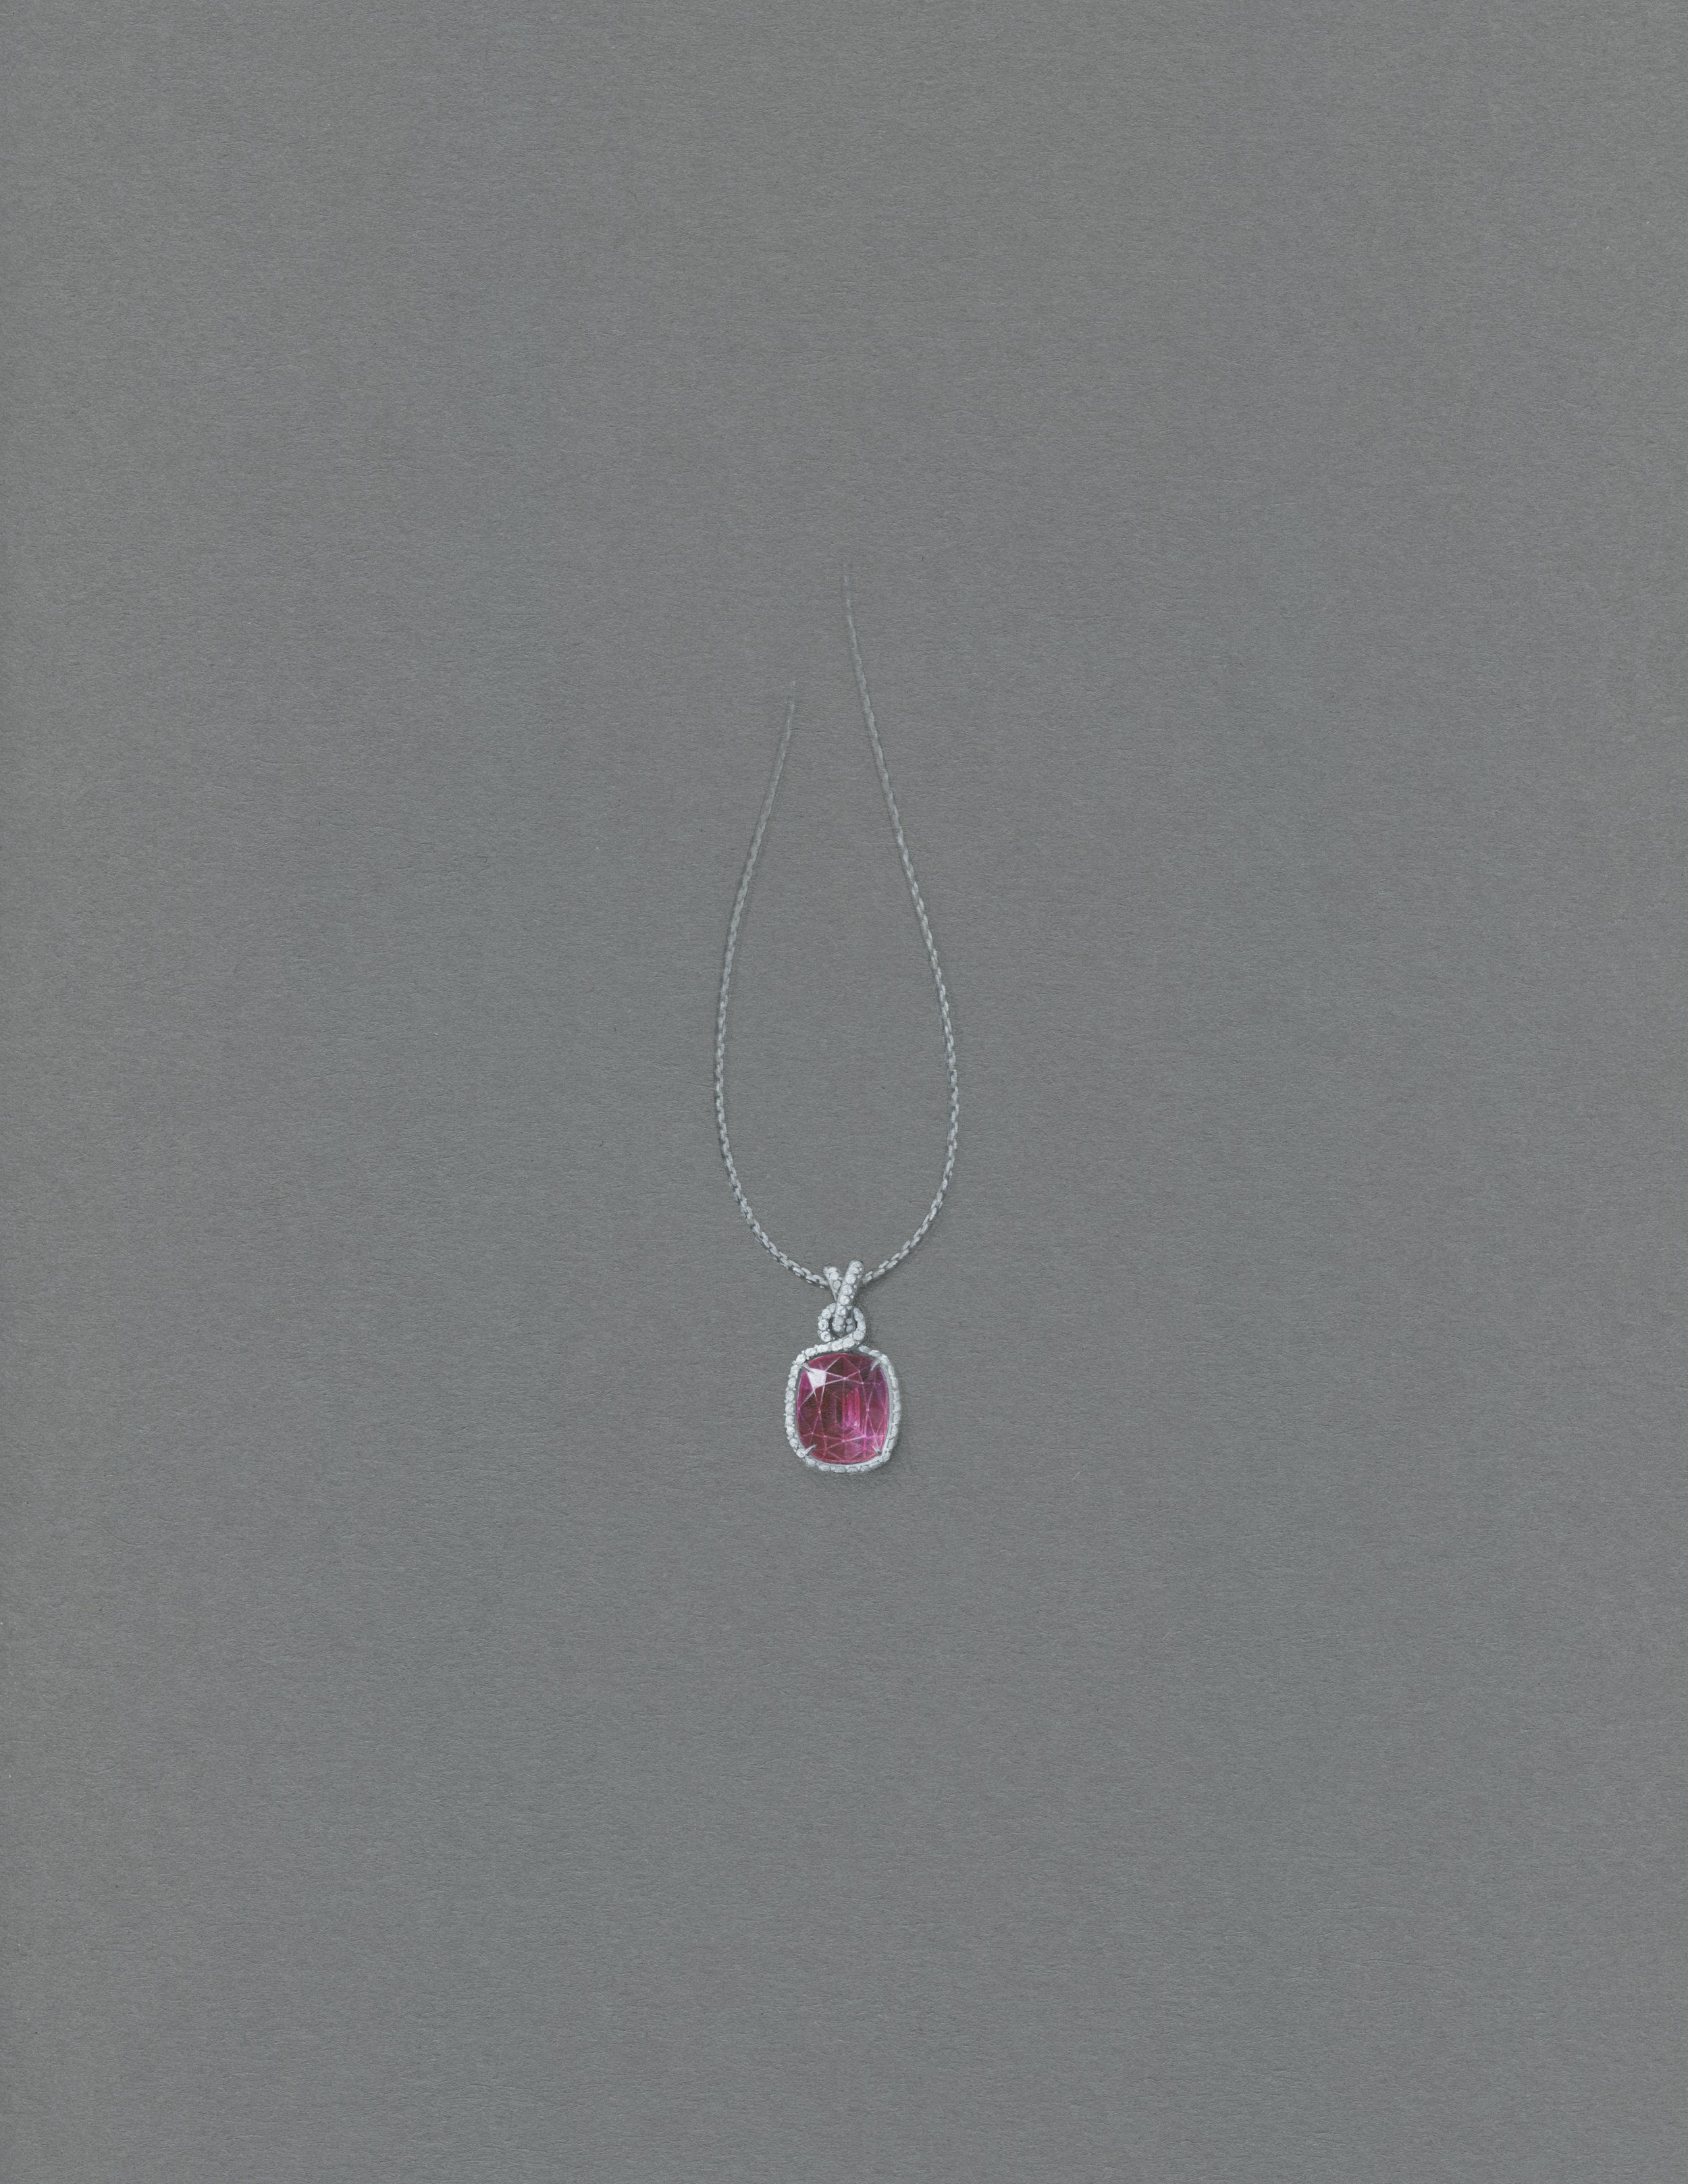  Gouache painting of a rubelite pendant  with white diamond pave in 18k white gold. 